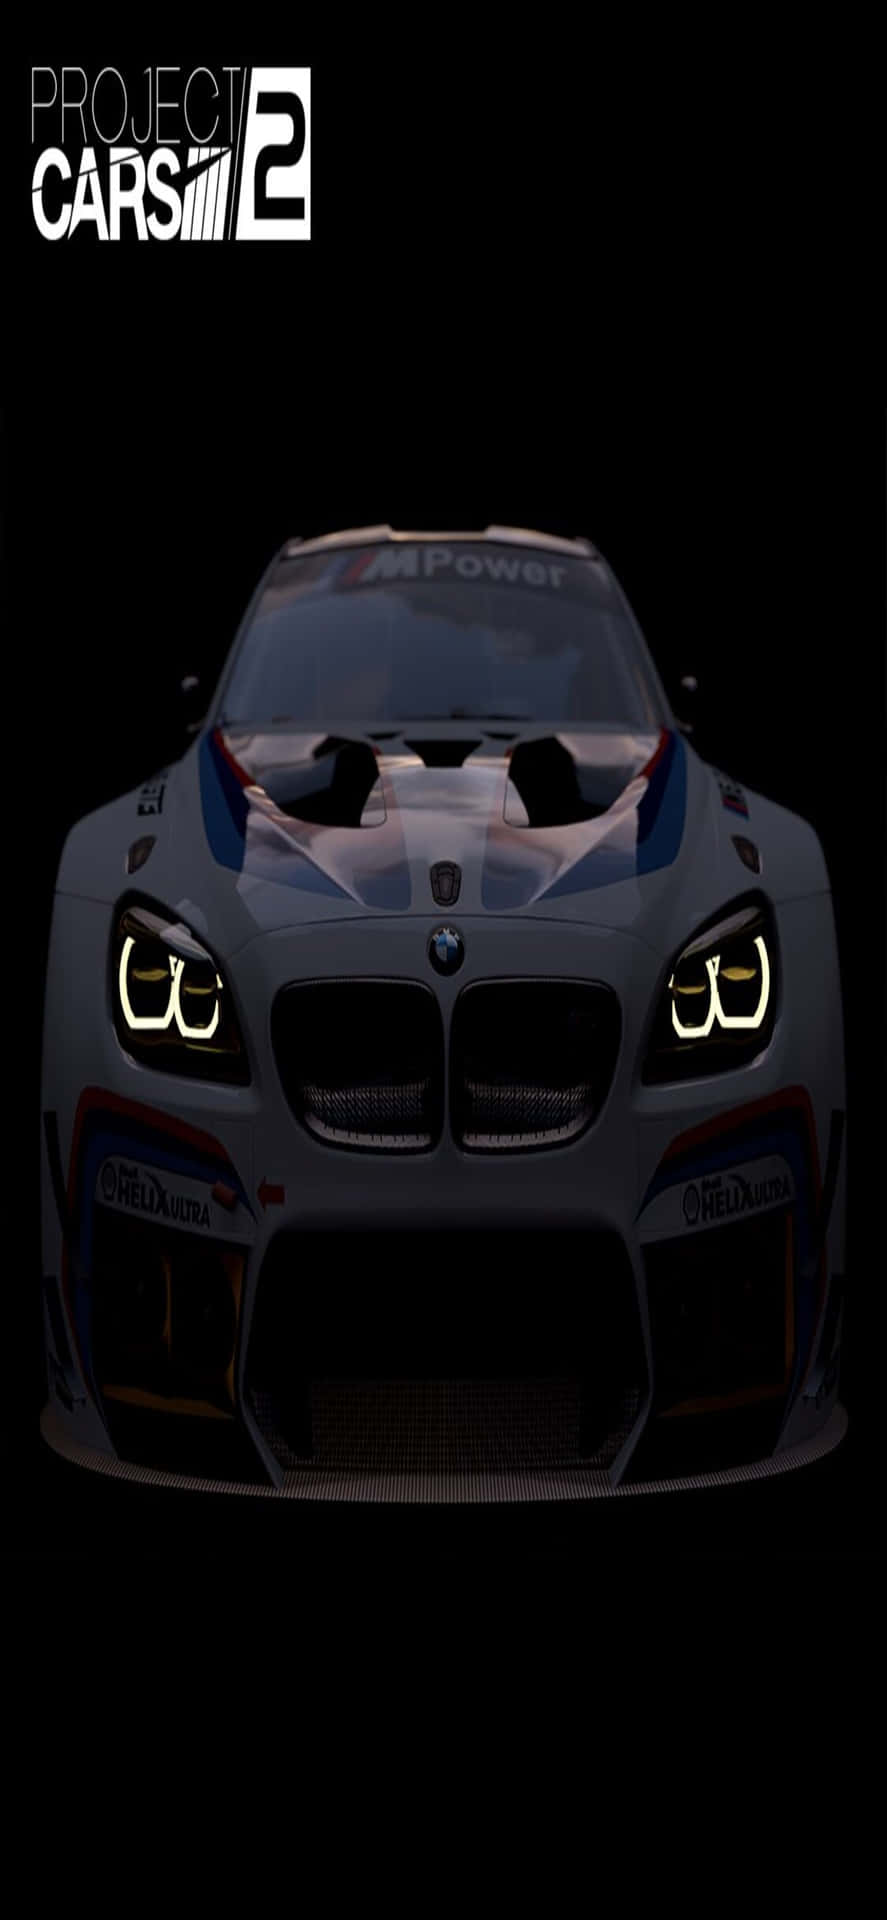 project cars 2 - bmw m6